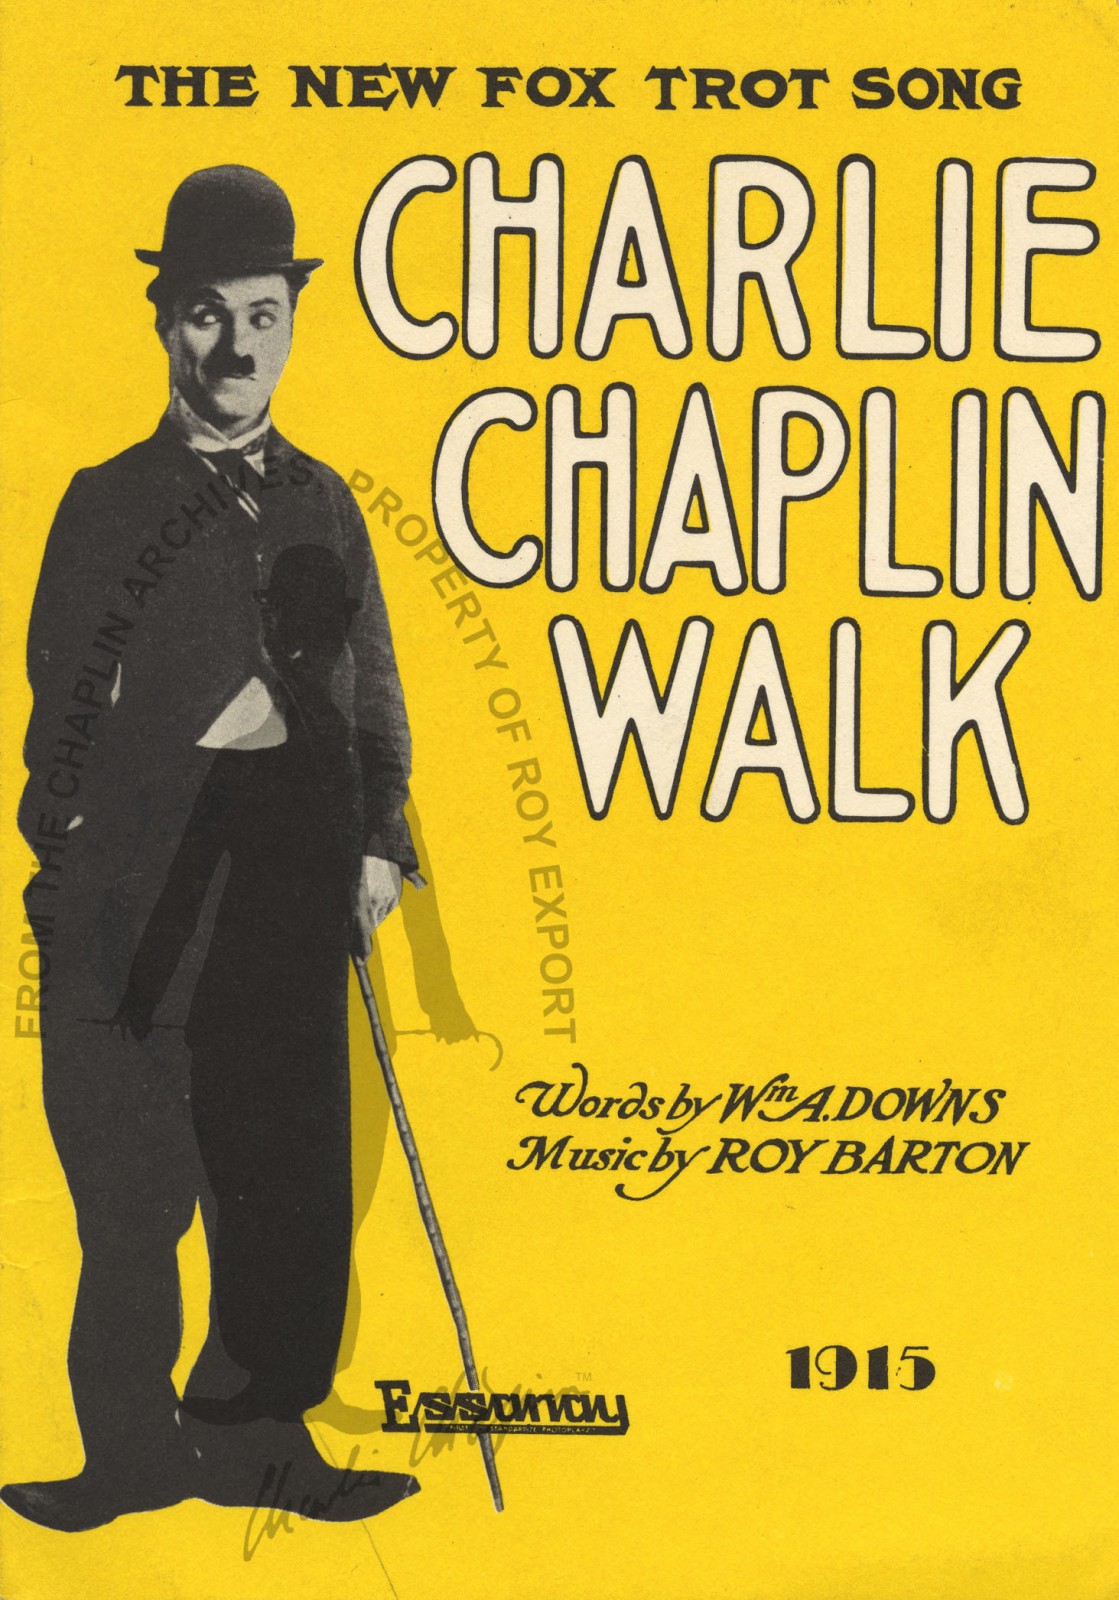 A song dedicated to the Charlie Chaplin Walk